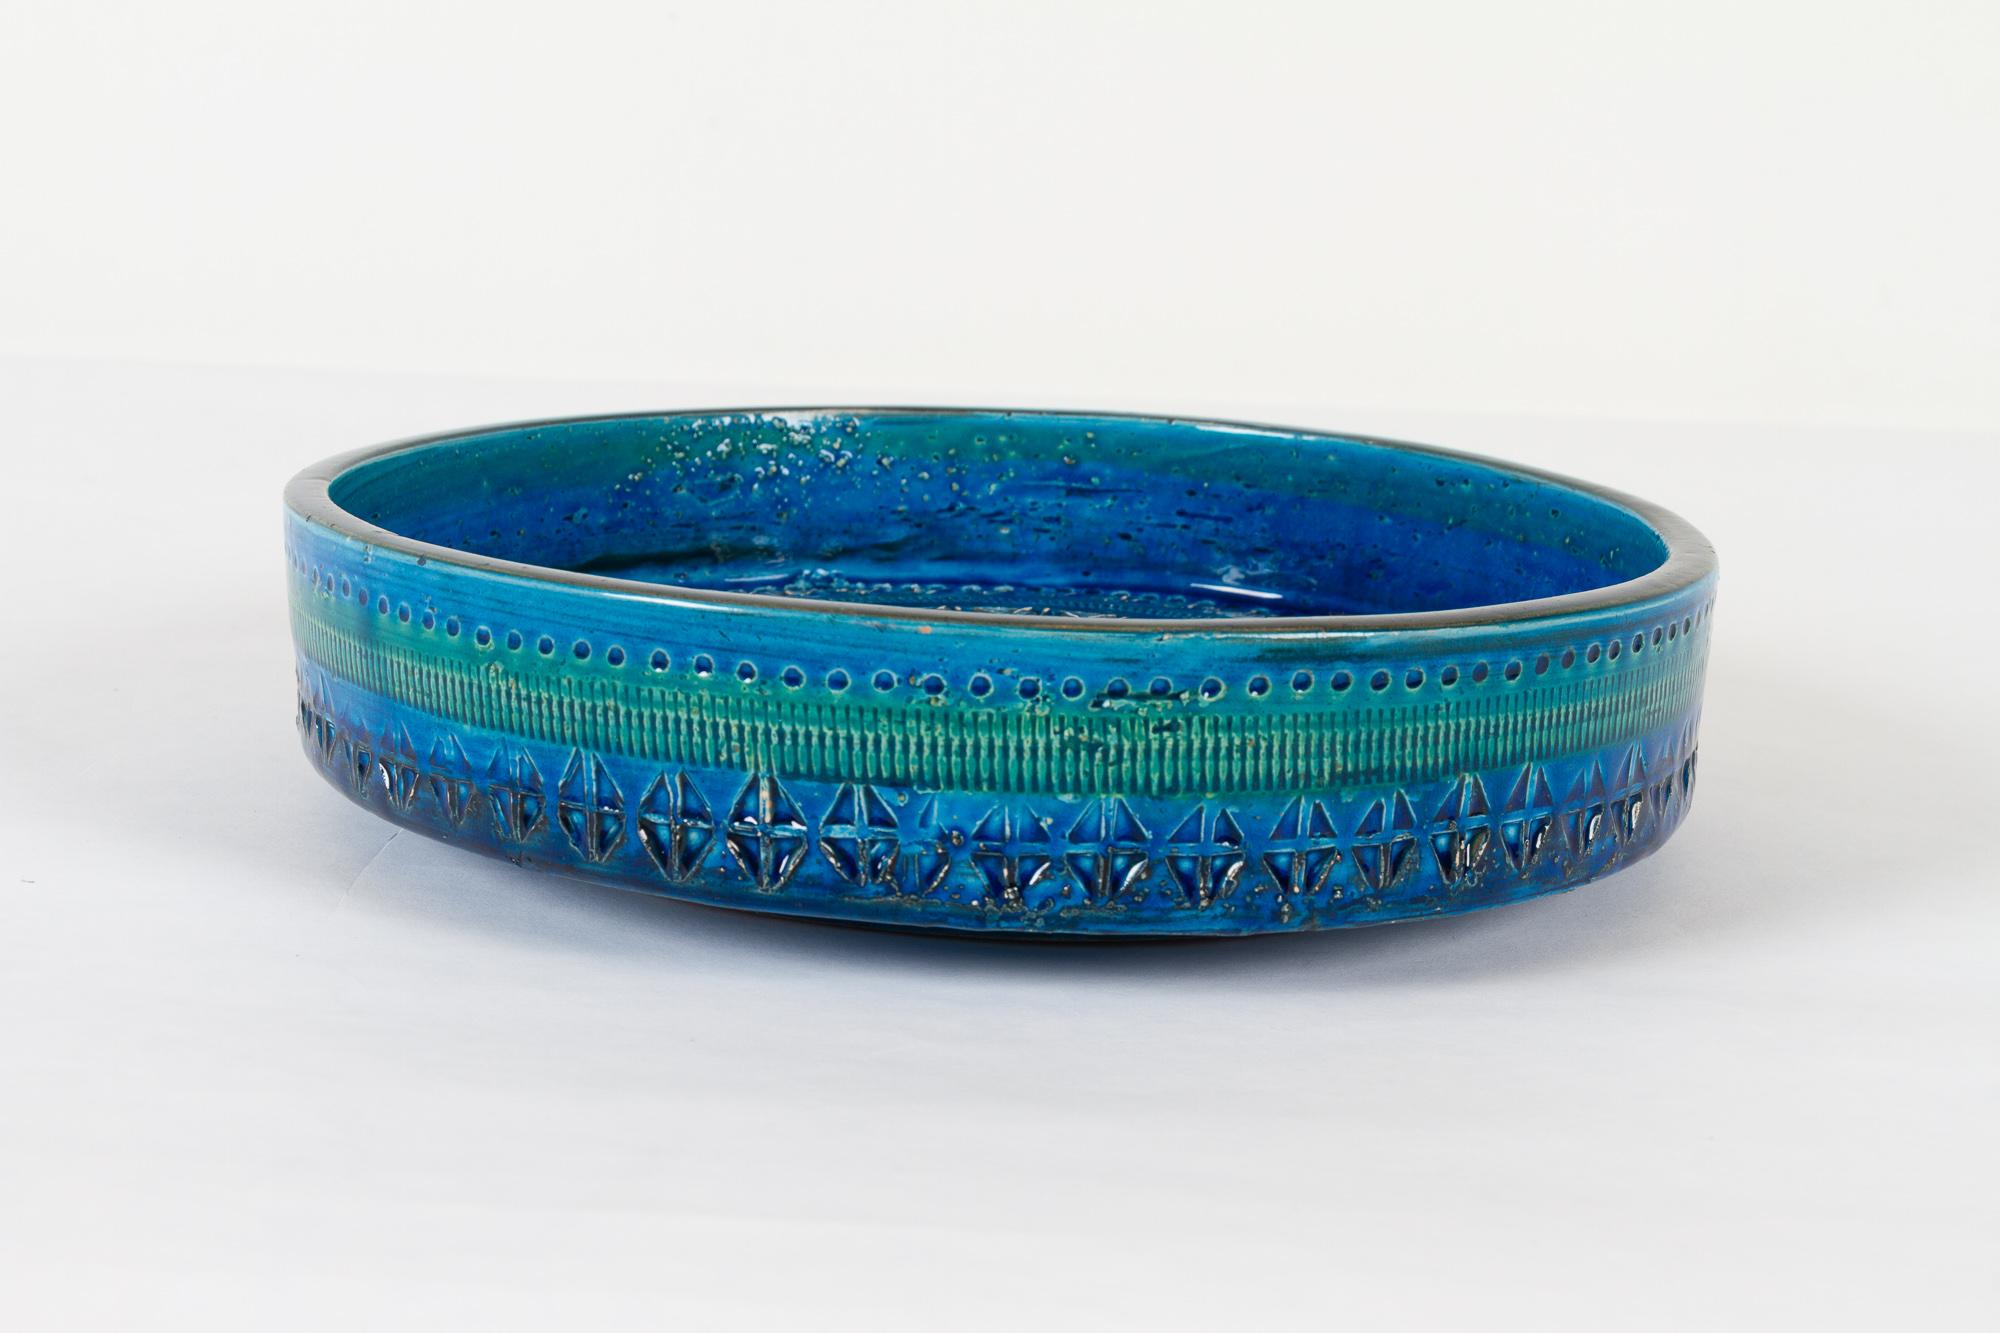 Vintage Italian ceramic bowl by Aldo Londi for Bitossi 1960s
Large handcrafted ceramic bowl in Rimini Blu glace.
Expressive blue, turquoise and green colors
Made for Illums Bolighus, Denmark. (Department store)
Very good condition, no cracks.
 